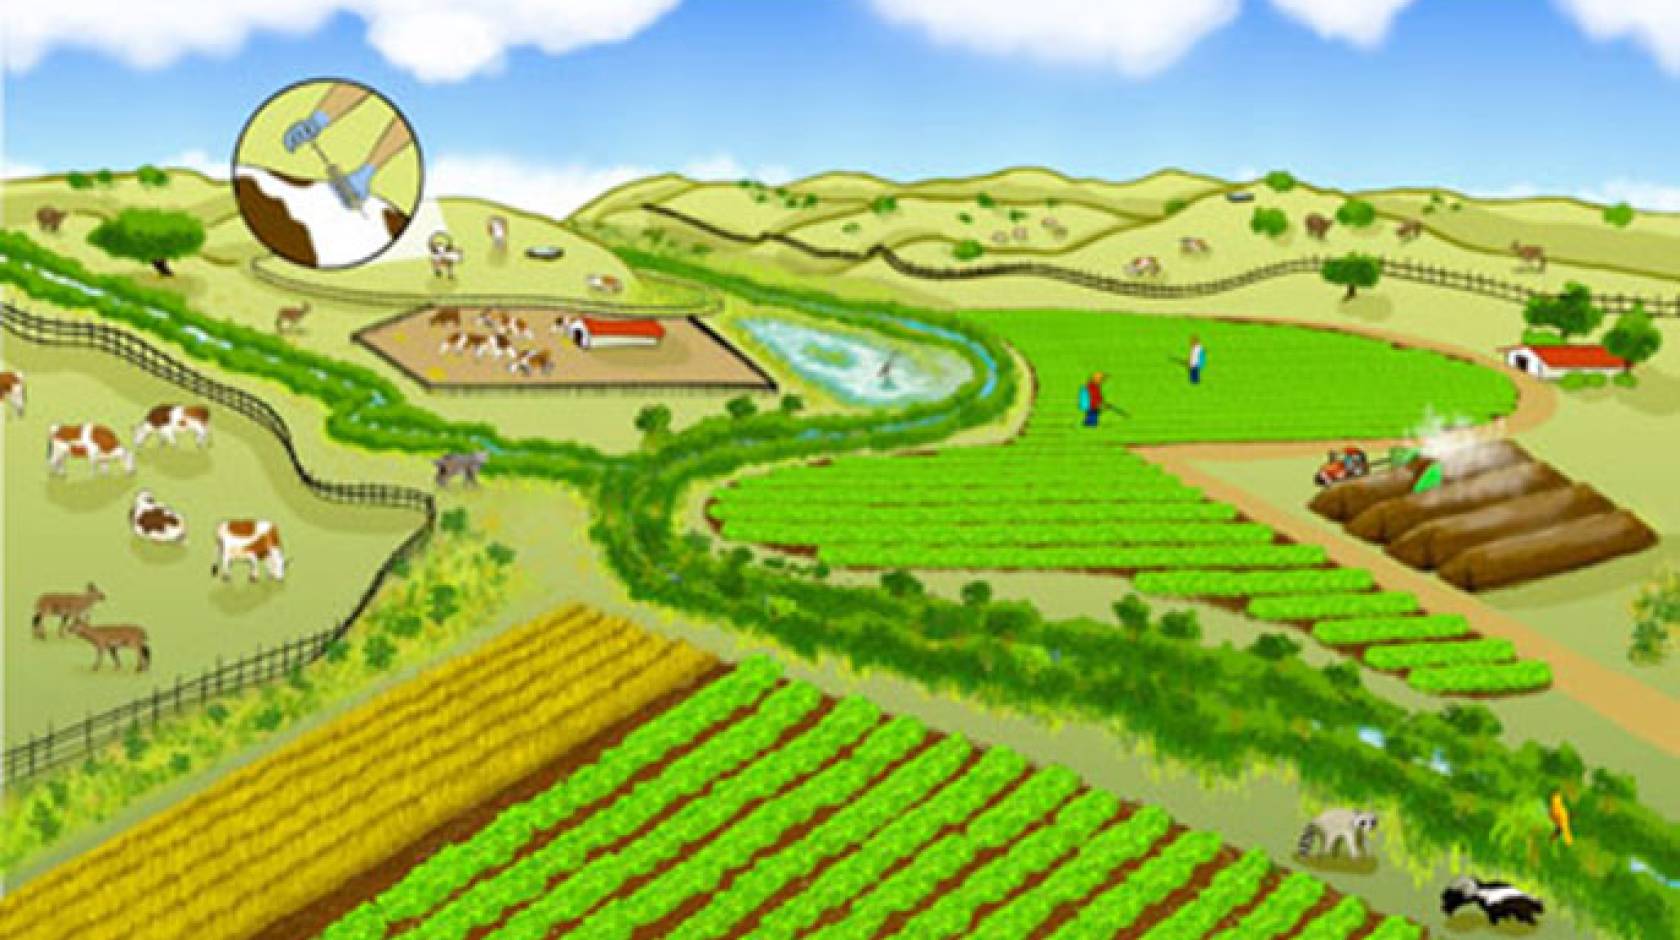 A farming landscape can be co-managed for both produce safety and nature conservation. Promising practices include buffering farm fields with non-crop vegetation to filter pathogens from runoff and planting low-risk crops between leafy green vegetables an